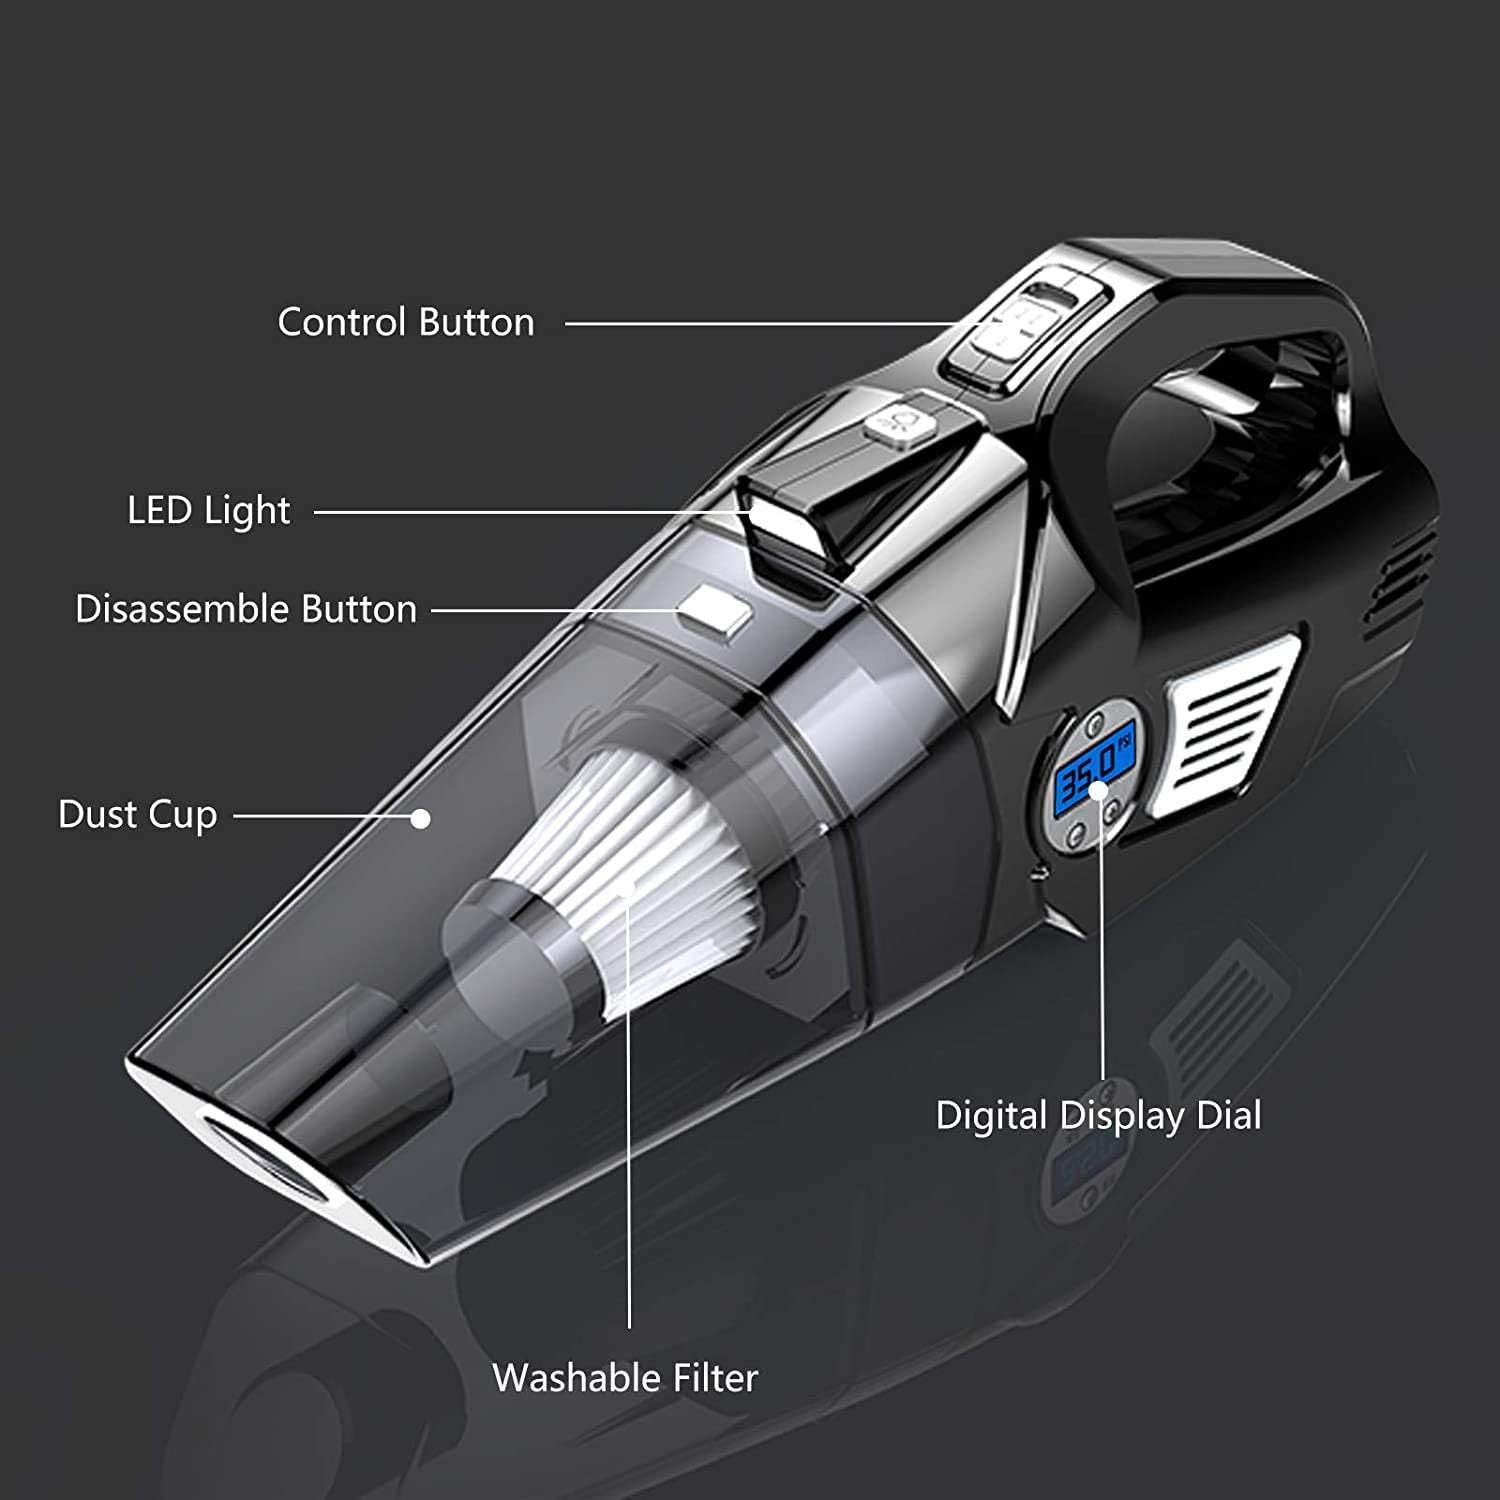 Uleete 4 in 1 Portable Car Vacuum Cleaner, Digital Air Compressor Pump with Auto Shut Off Feature, DC 12V Tire Inflator for Car